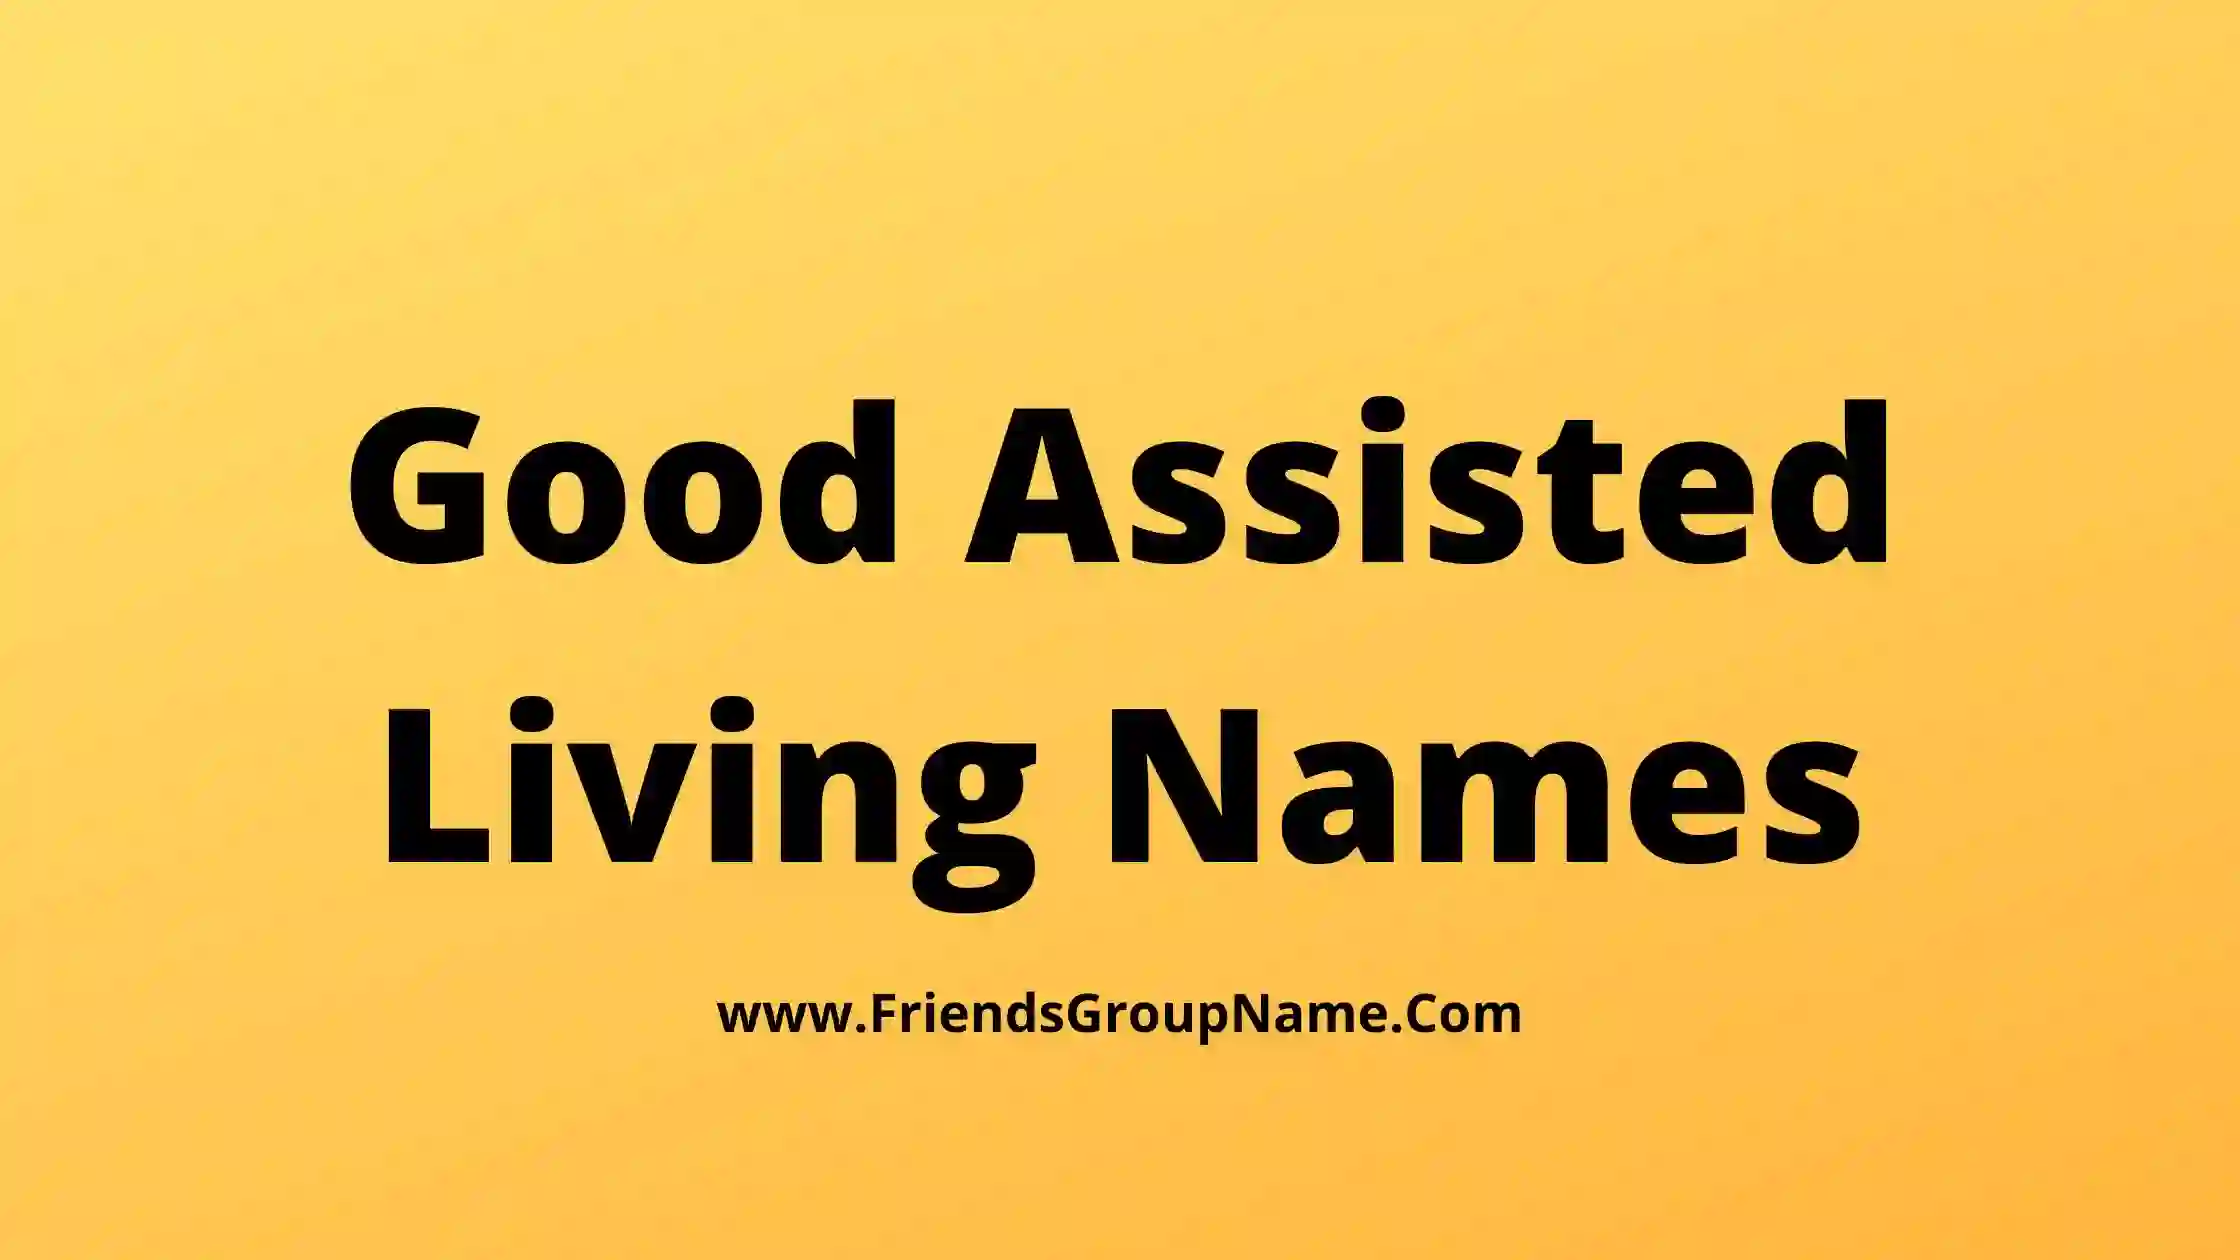 Good Assisted Living Names